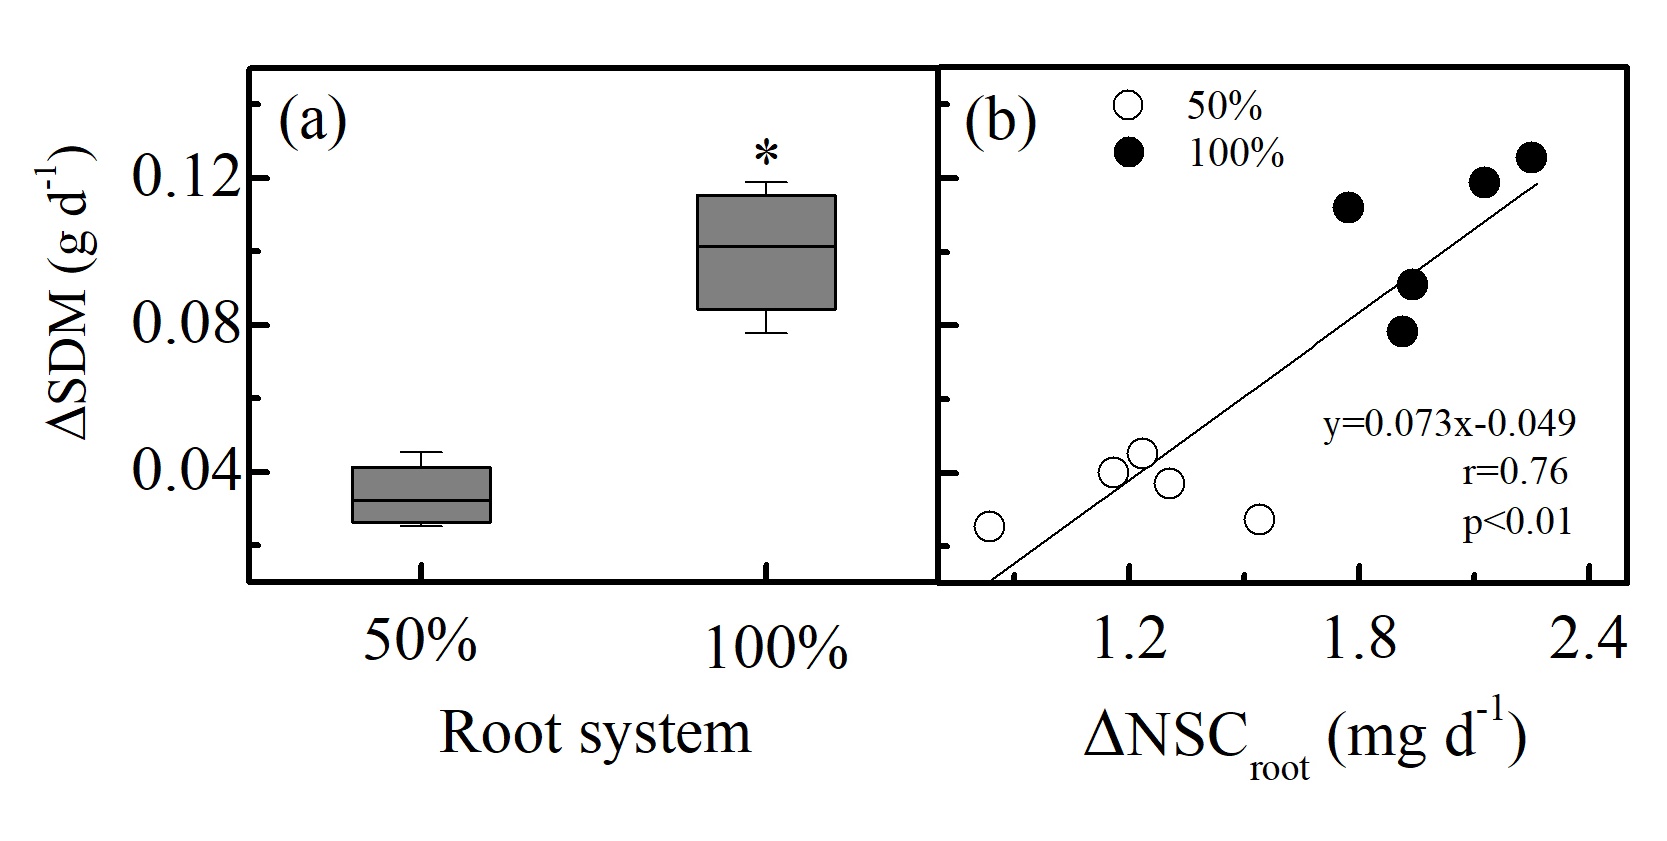 Sugarcane regrowth is dependent on root system size: an approach using young plants grown in nutrient solution